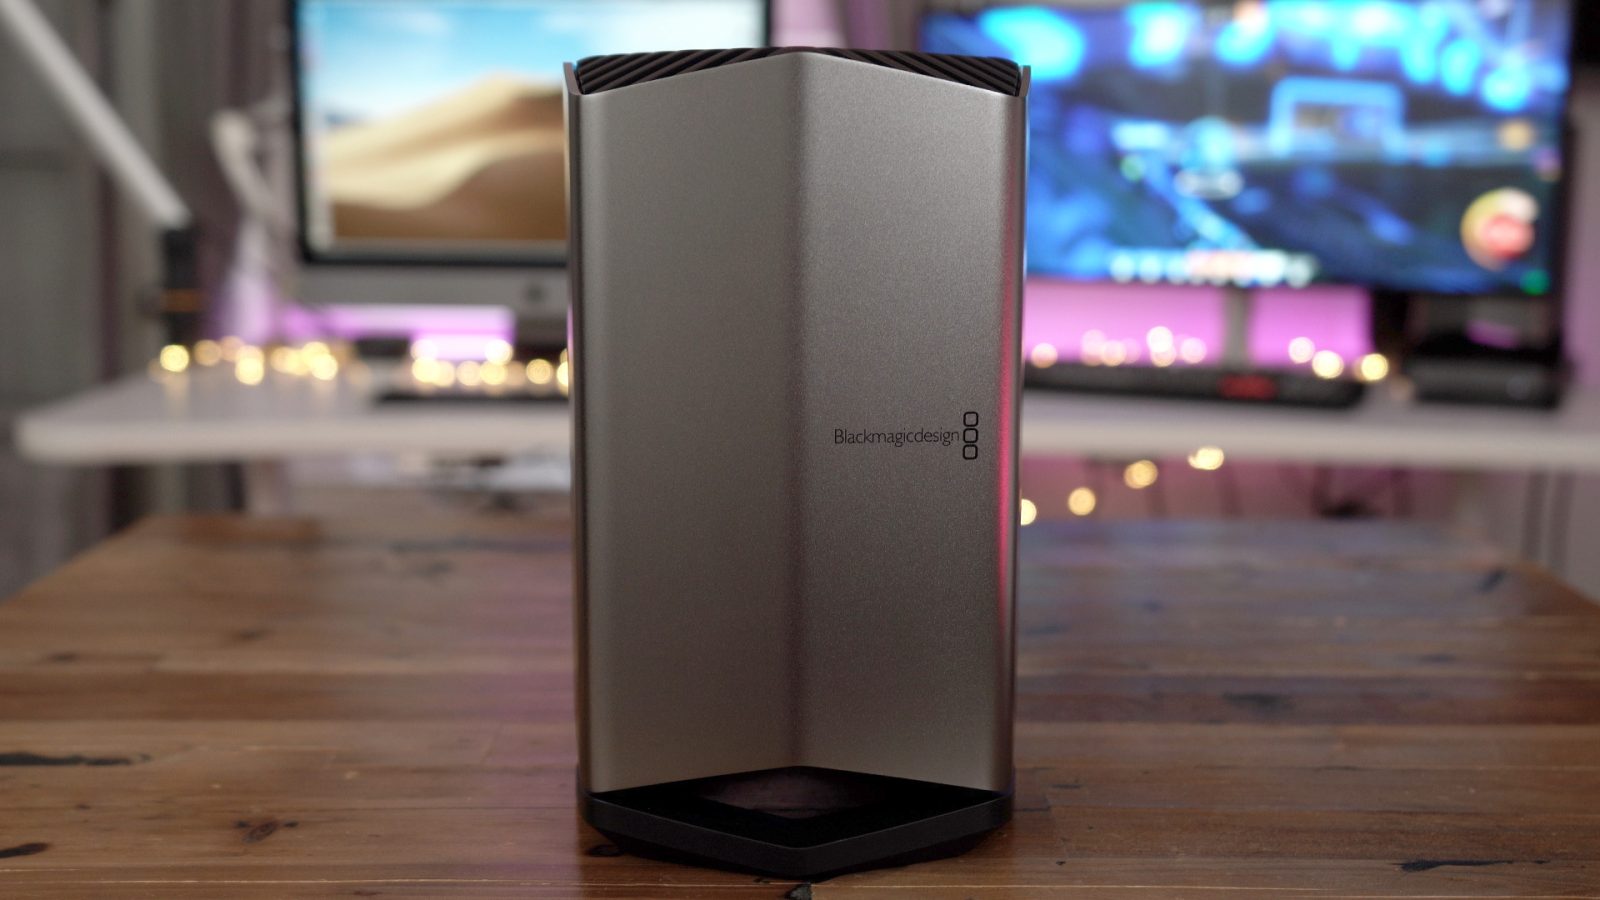 photo of Review: Blackmagic eGPU Pro – more powerful and capable, but who is it for? [Video] image